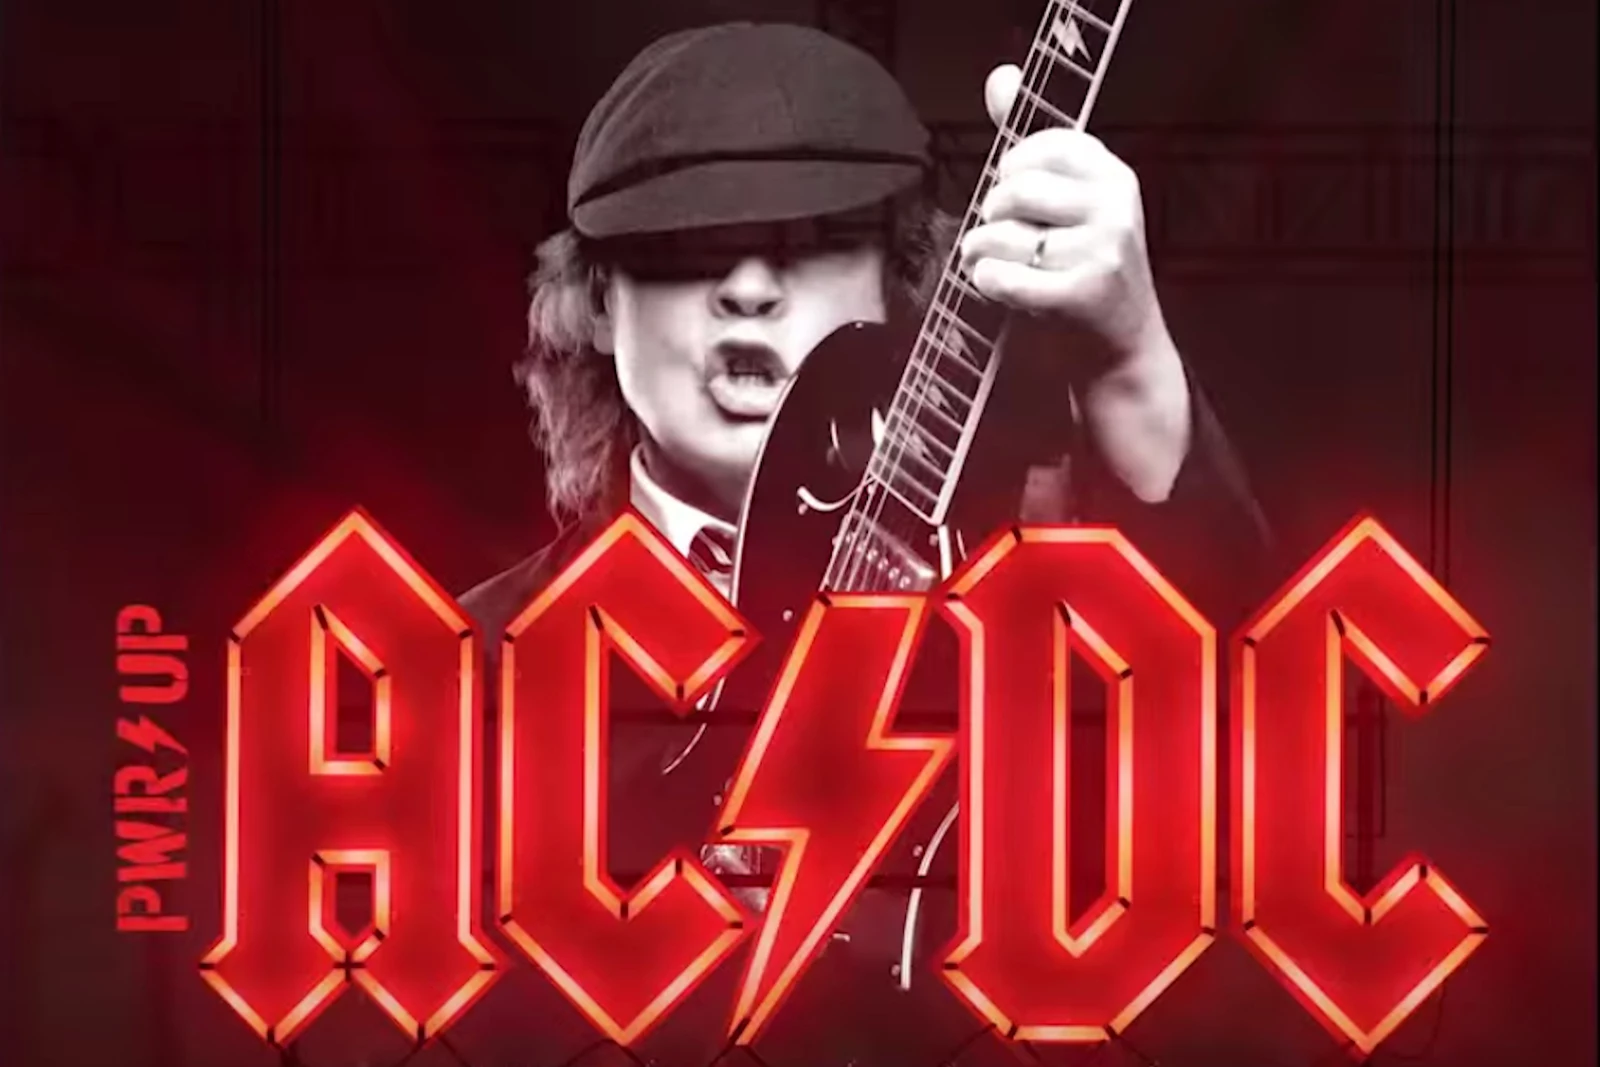 AC/DC Announce The Details Of Their New Album Along With The Release Of  Their New Single, Shot In The Dark